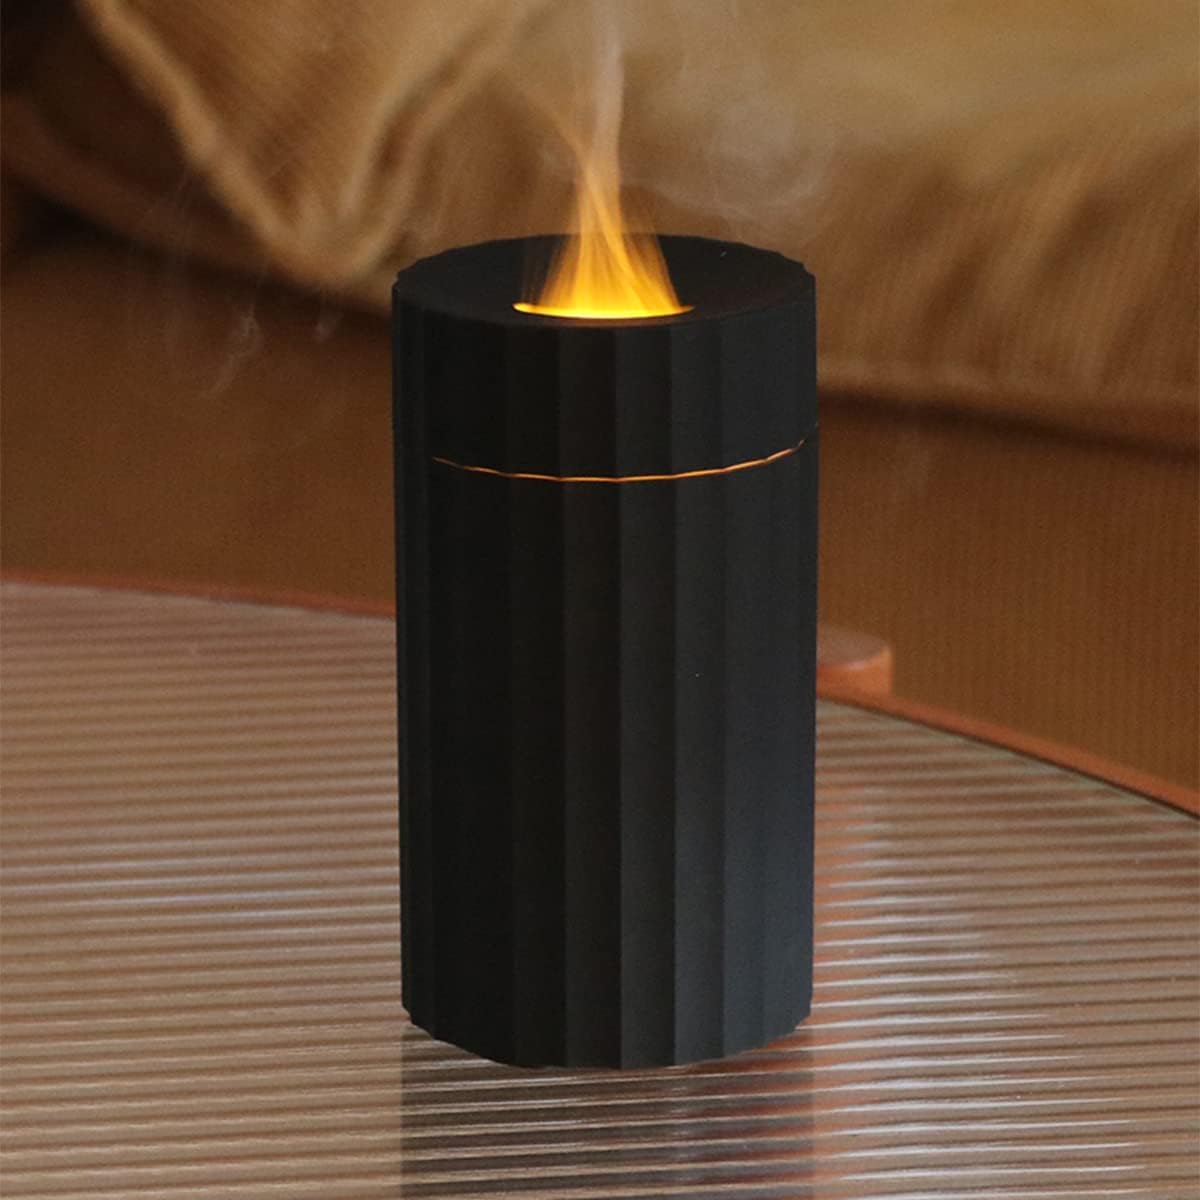 Car Essential Oil Diffuser - With Flame Effect Light humidifier  fire